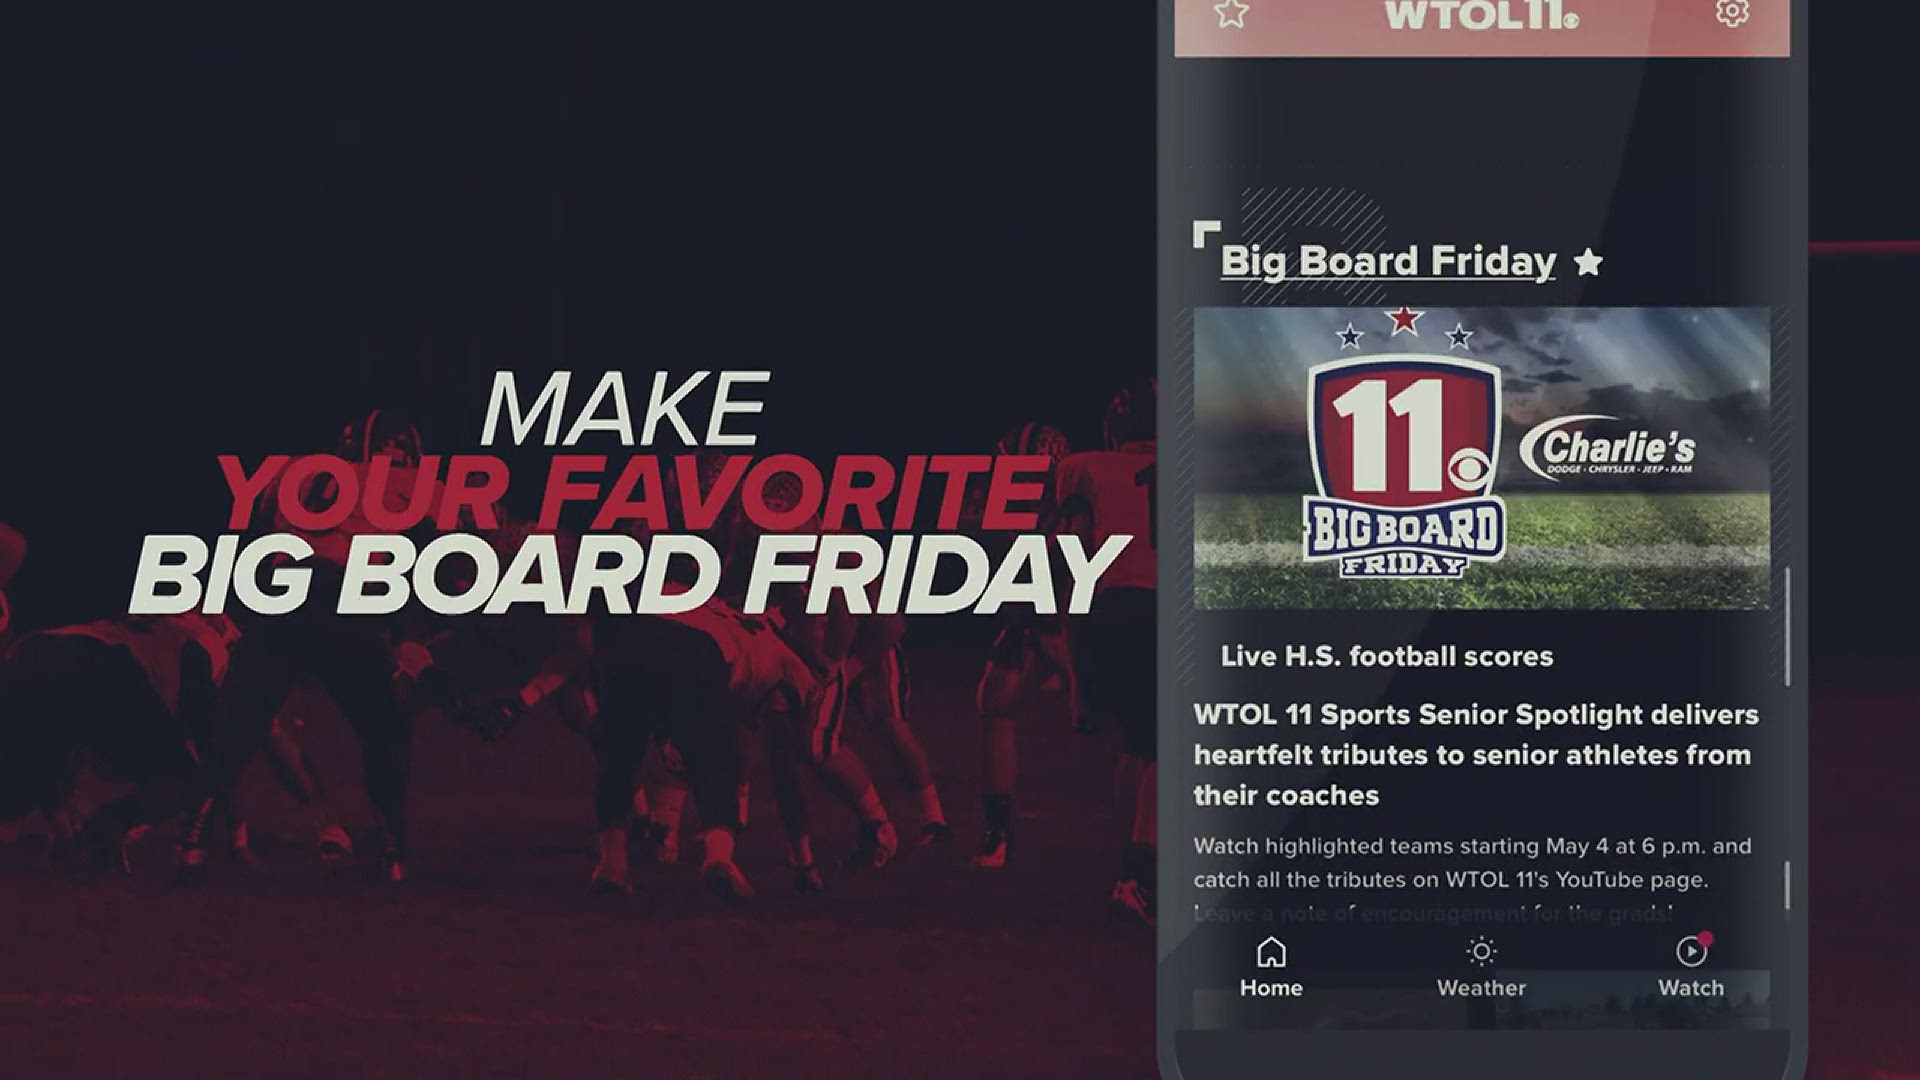 Download it now to stay up to date on all the Friday night scoring.